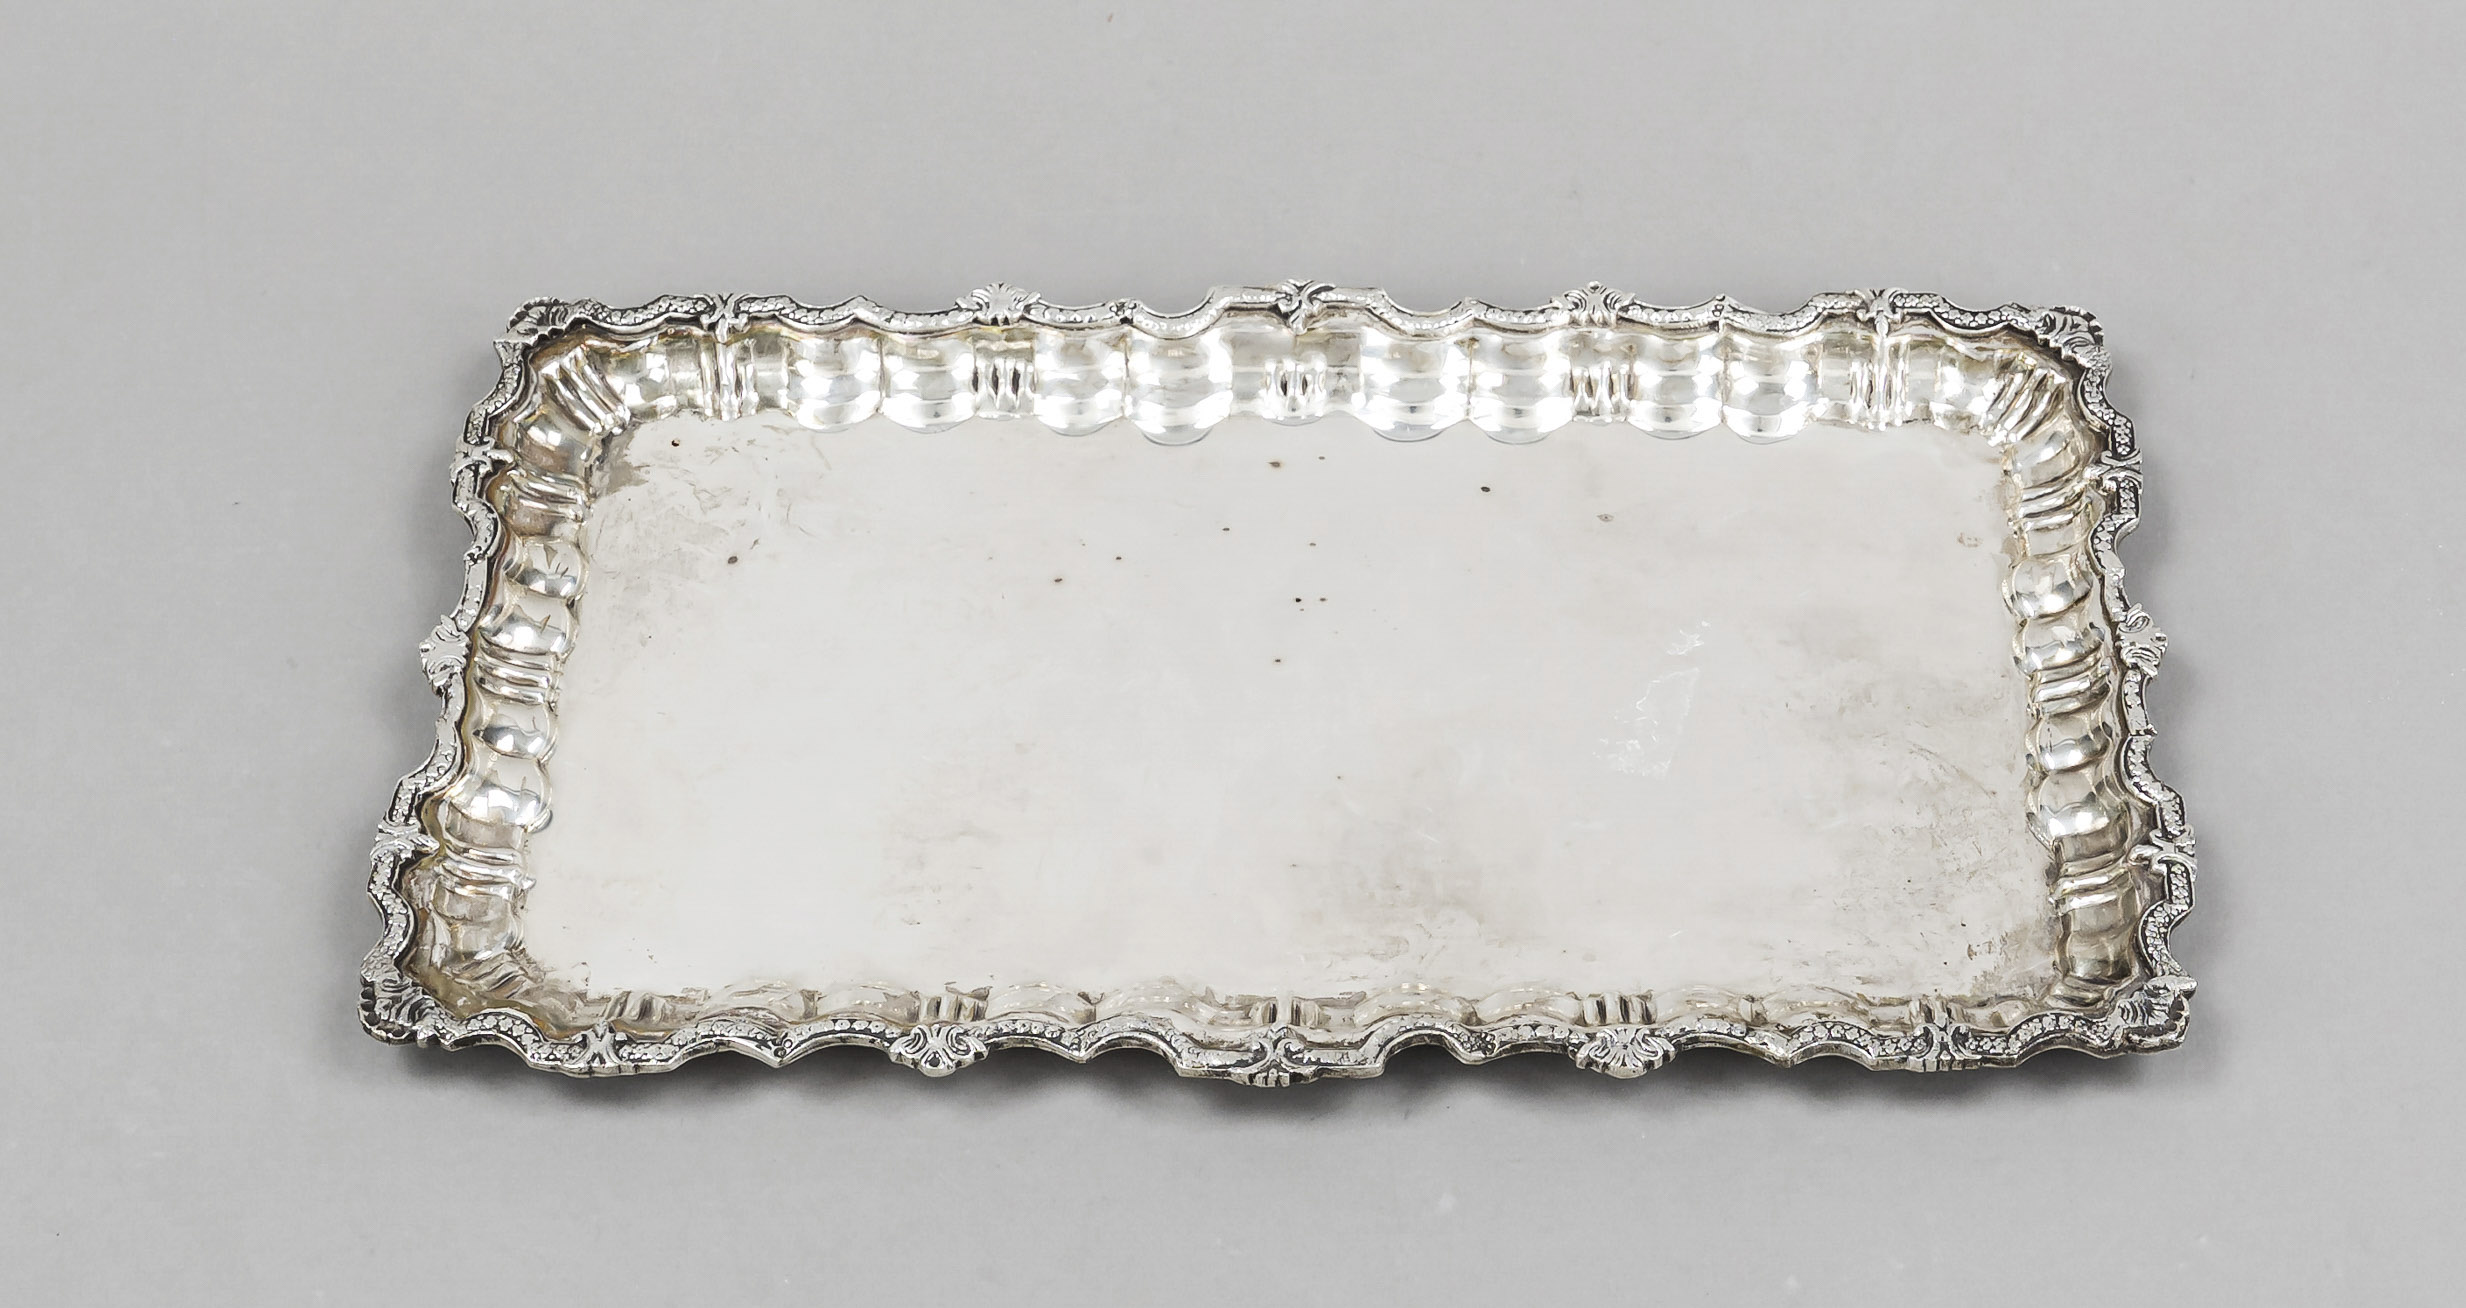 Rectangular tray, Egypt, 2nd half 20th century, hallmarked silver, fitted curved rim with relief